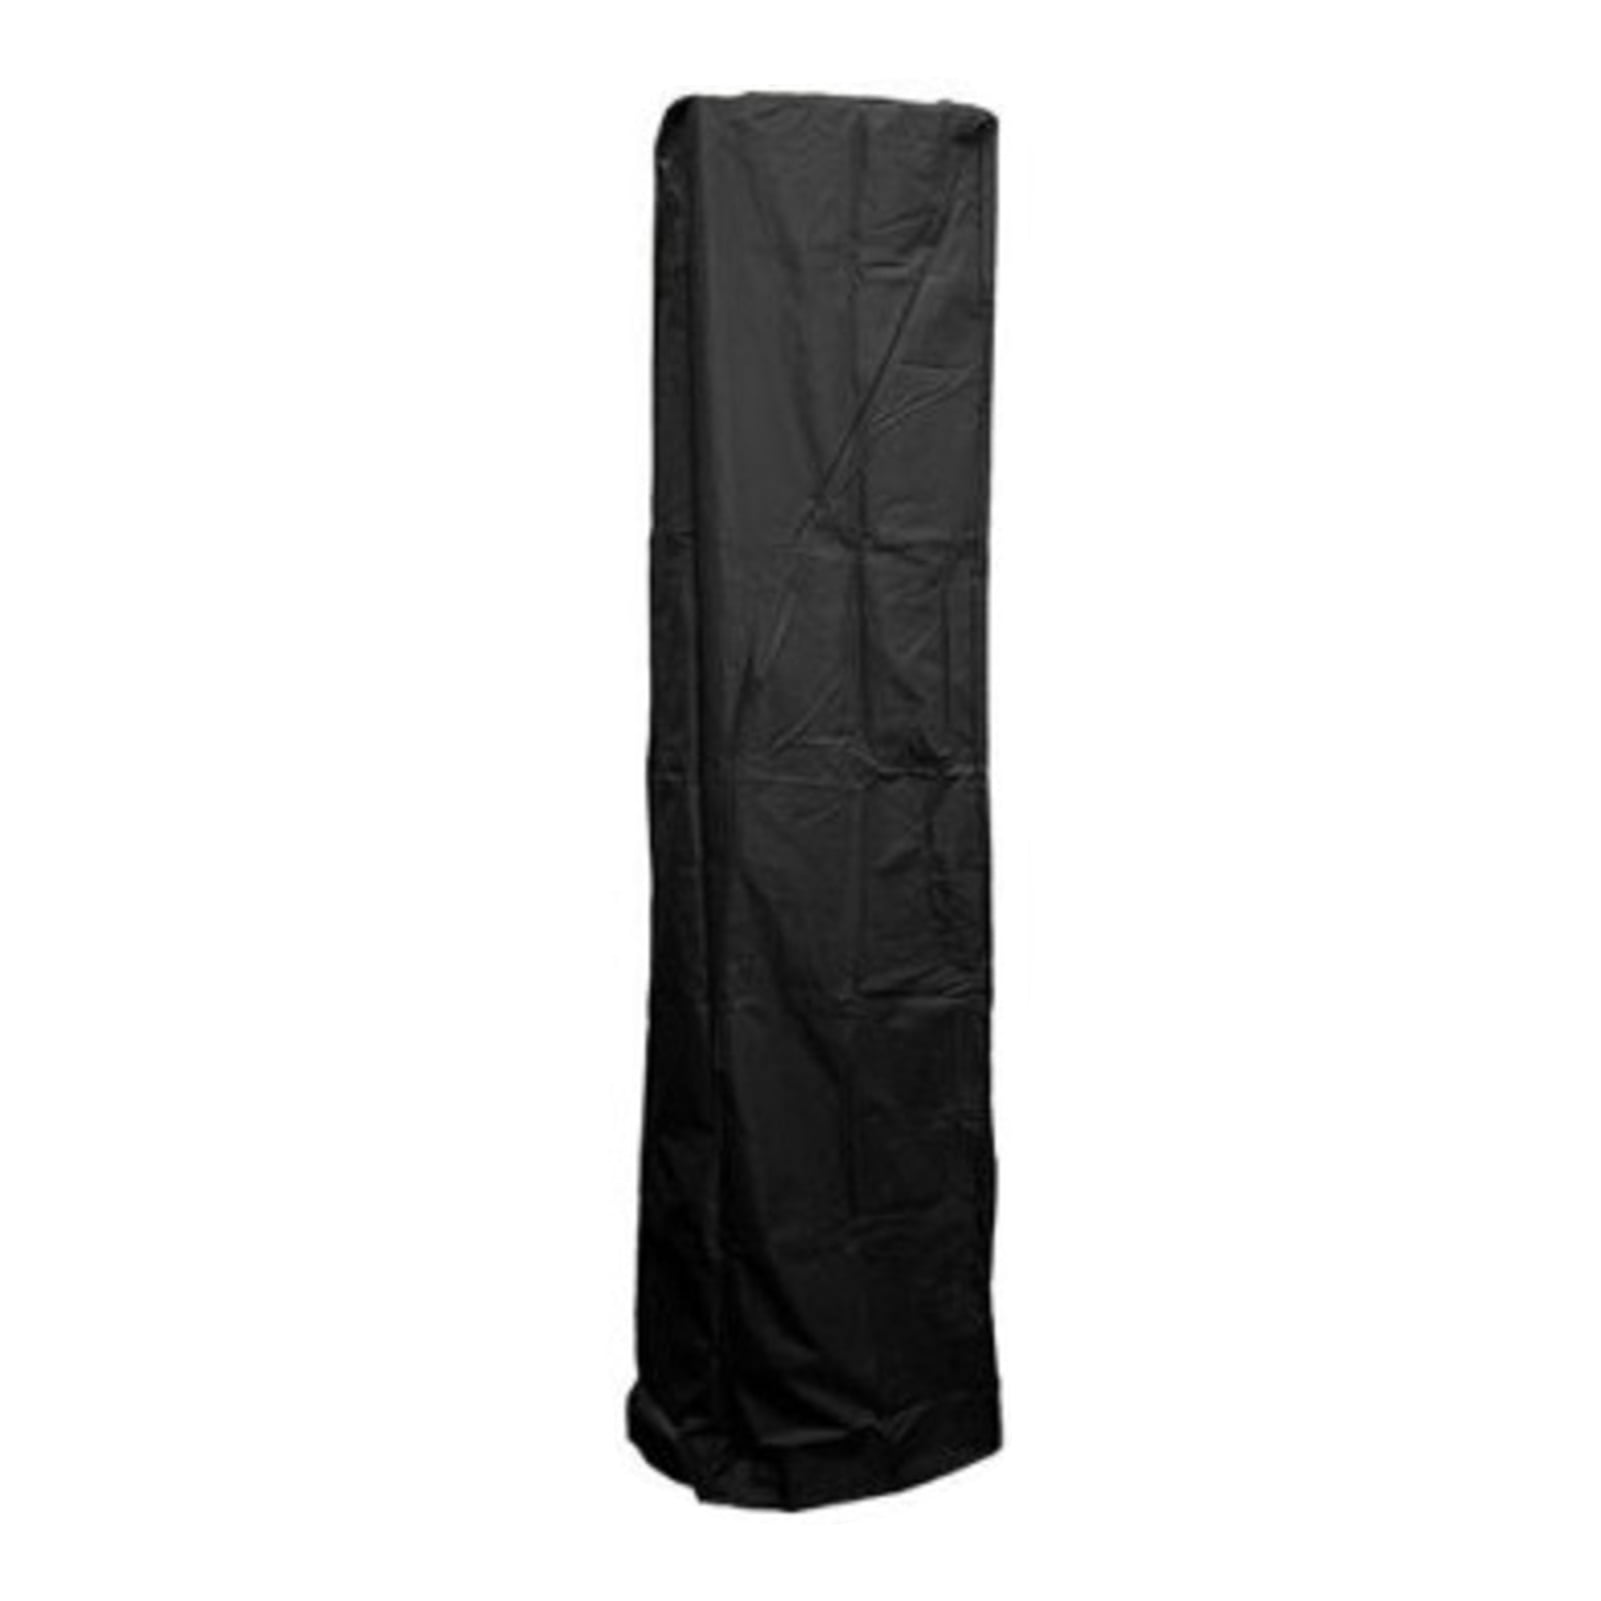 B Blesiya 87-95H Waterproof Garden Patio Heater Cover Heavy Duty Breathable Stand Up Patio Heater Cover 228x106x70cm Black 